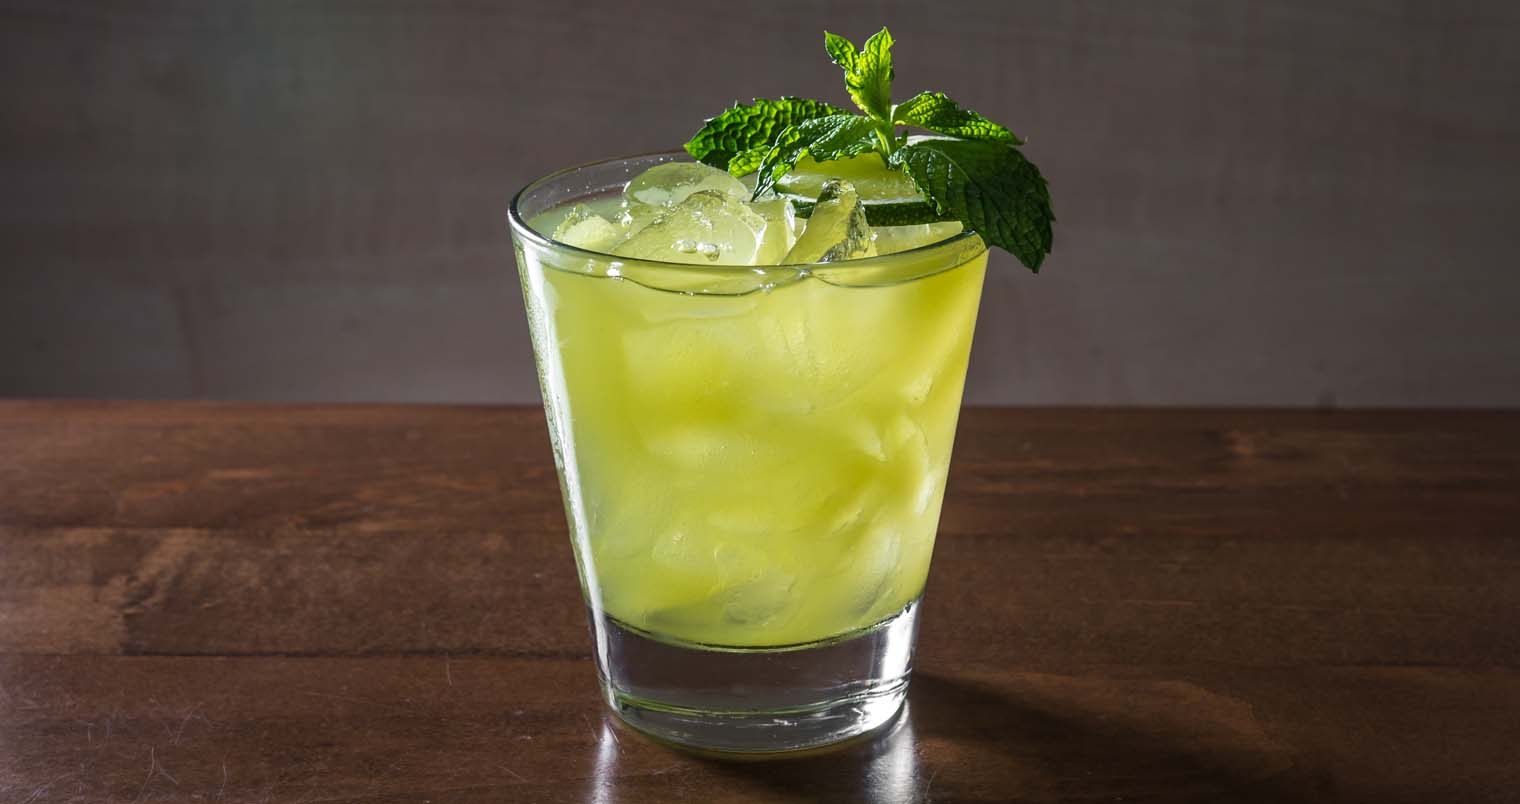 3 Cocktails to Celebrate National Tequila Day on July 24th